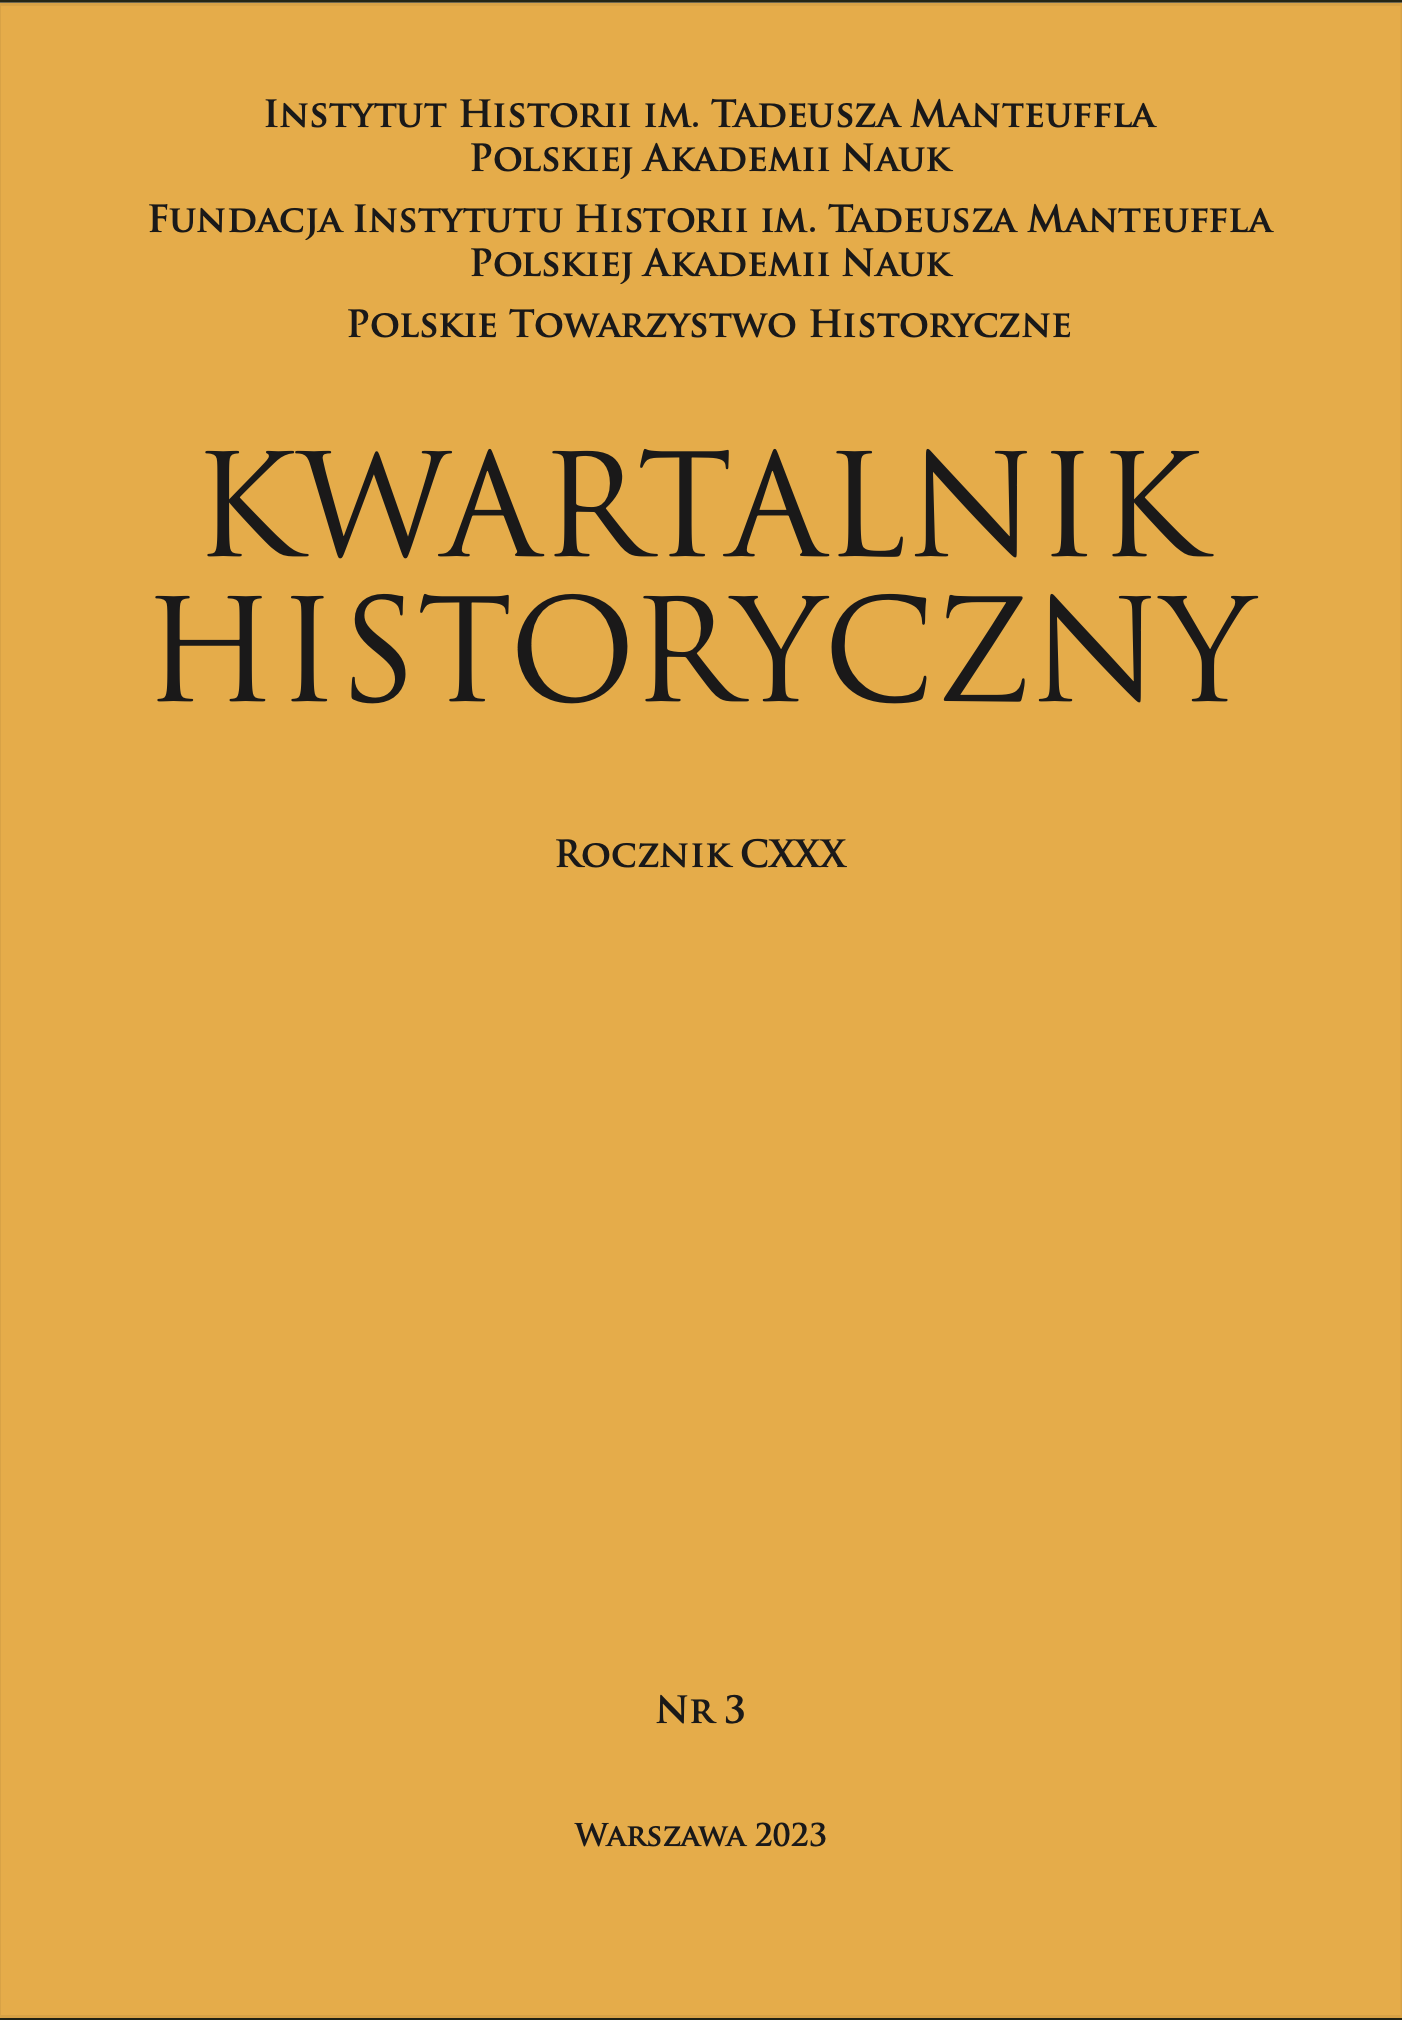 POLISH SOLDIERS IN PAVLISHCHEV BOR (1939–1941) IN THE LIGHT OF POST-WAR ACCOUNTS Cover Image